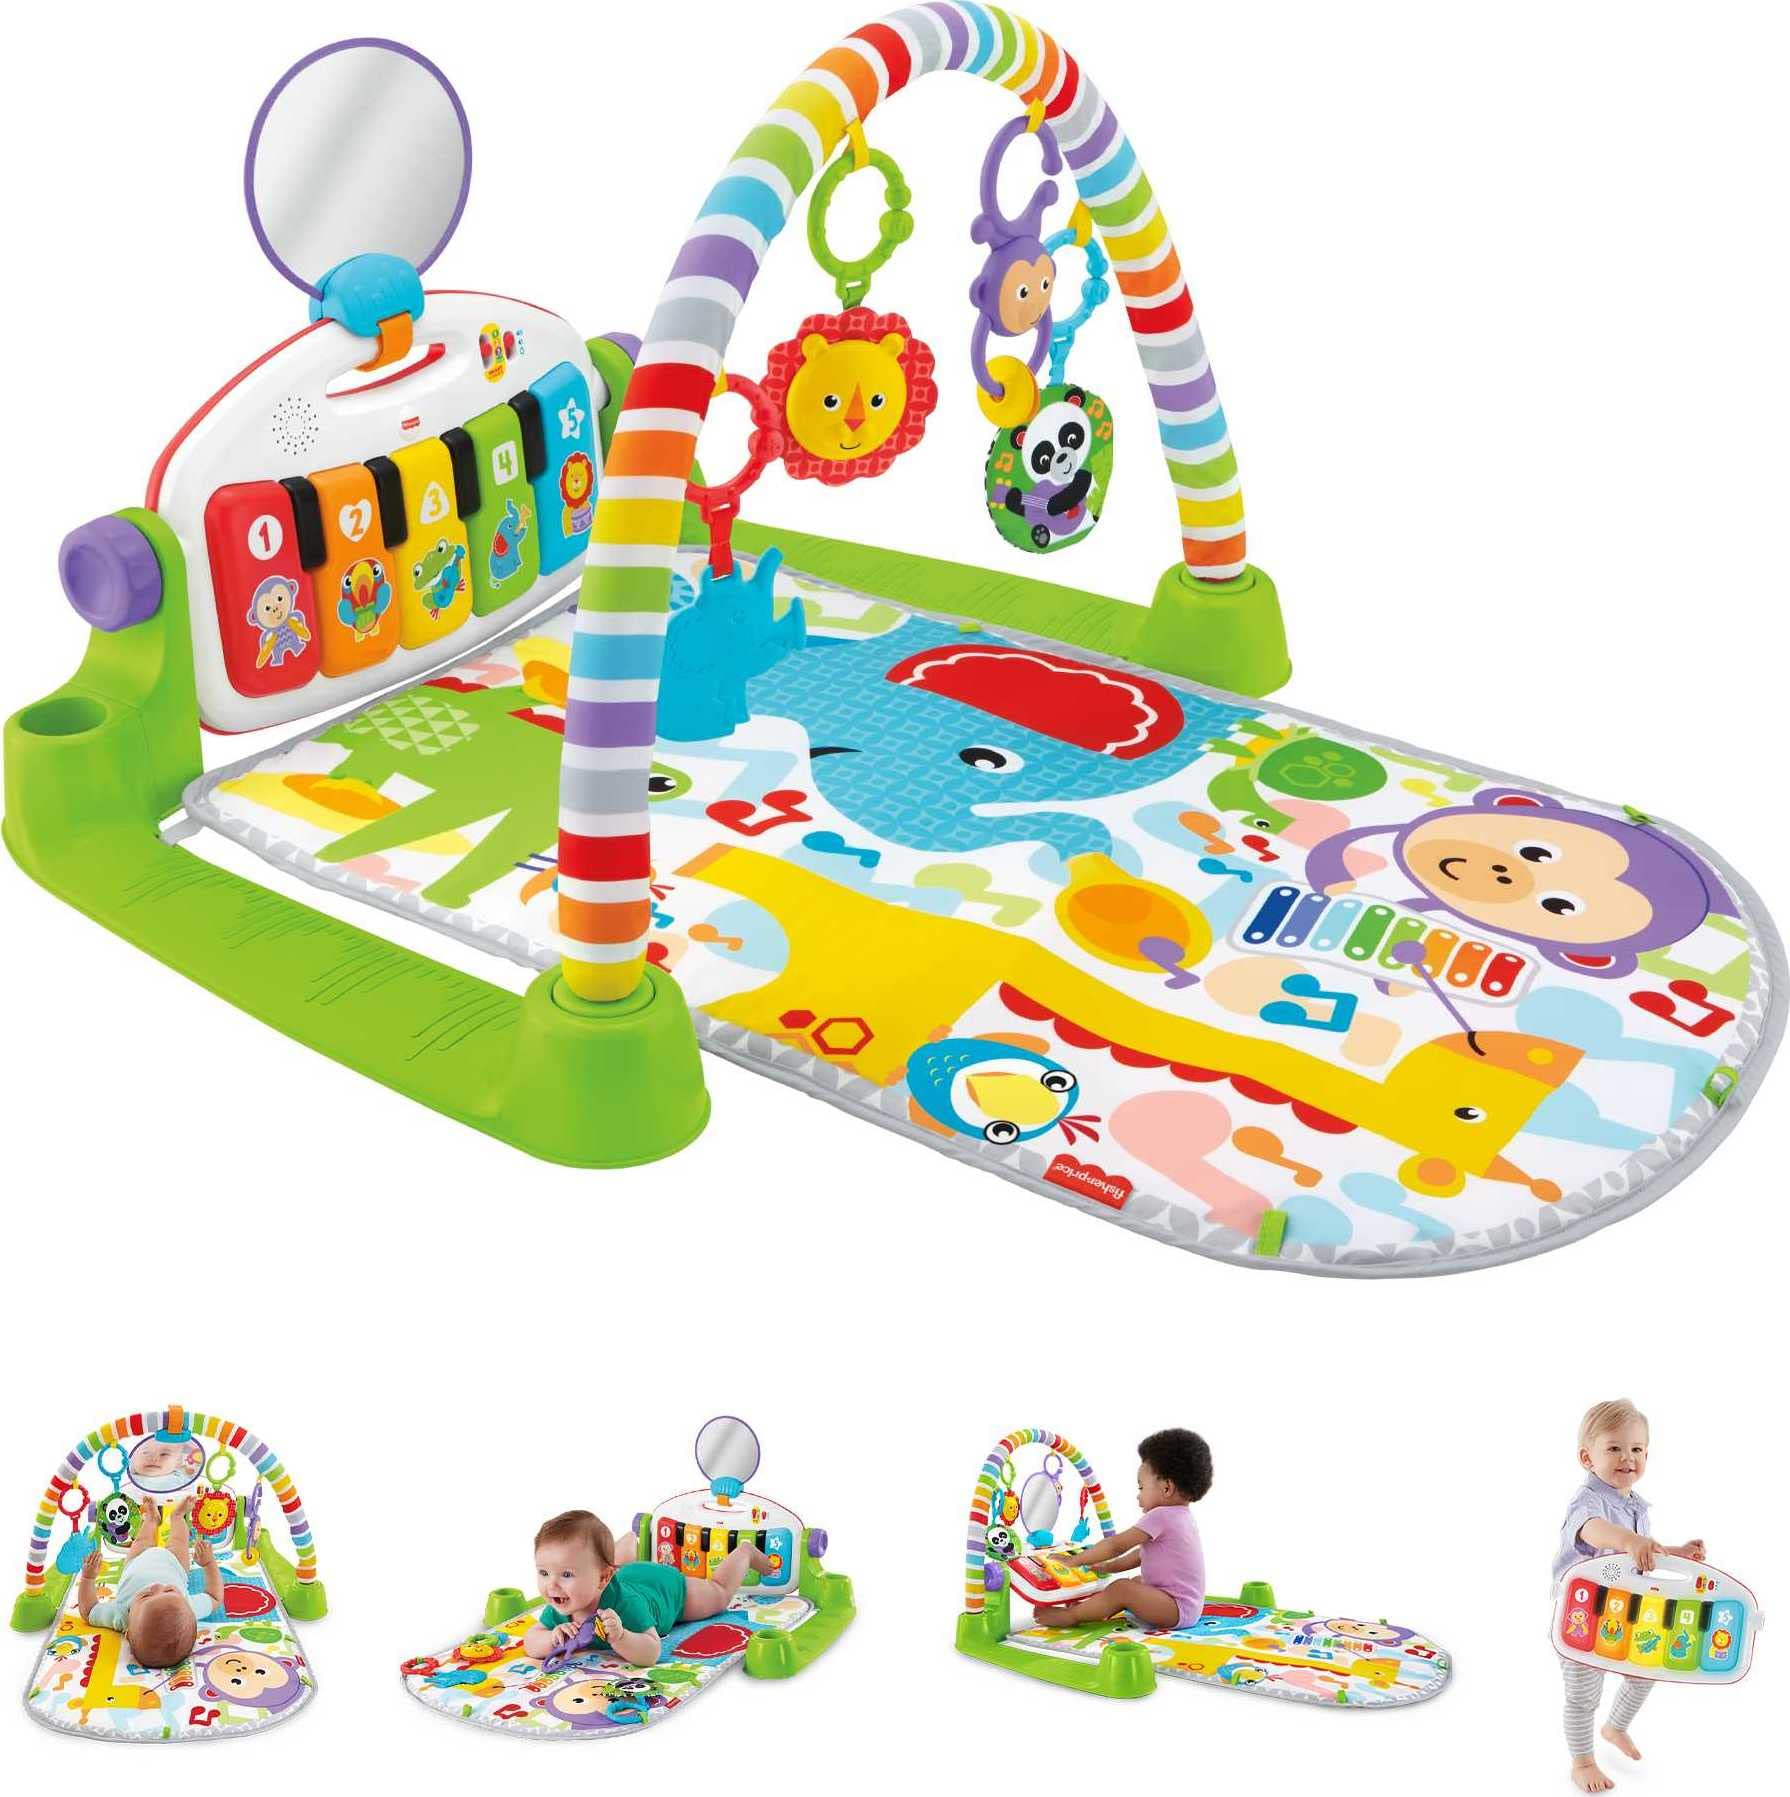 Fisher-Price Deluxe Kick 'n Play Piano Gym (Green) $29.99 + Free Shipping w/ Prime or on $35+